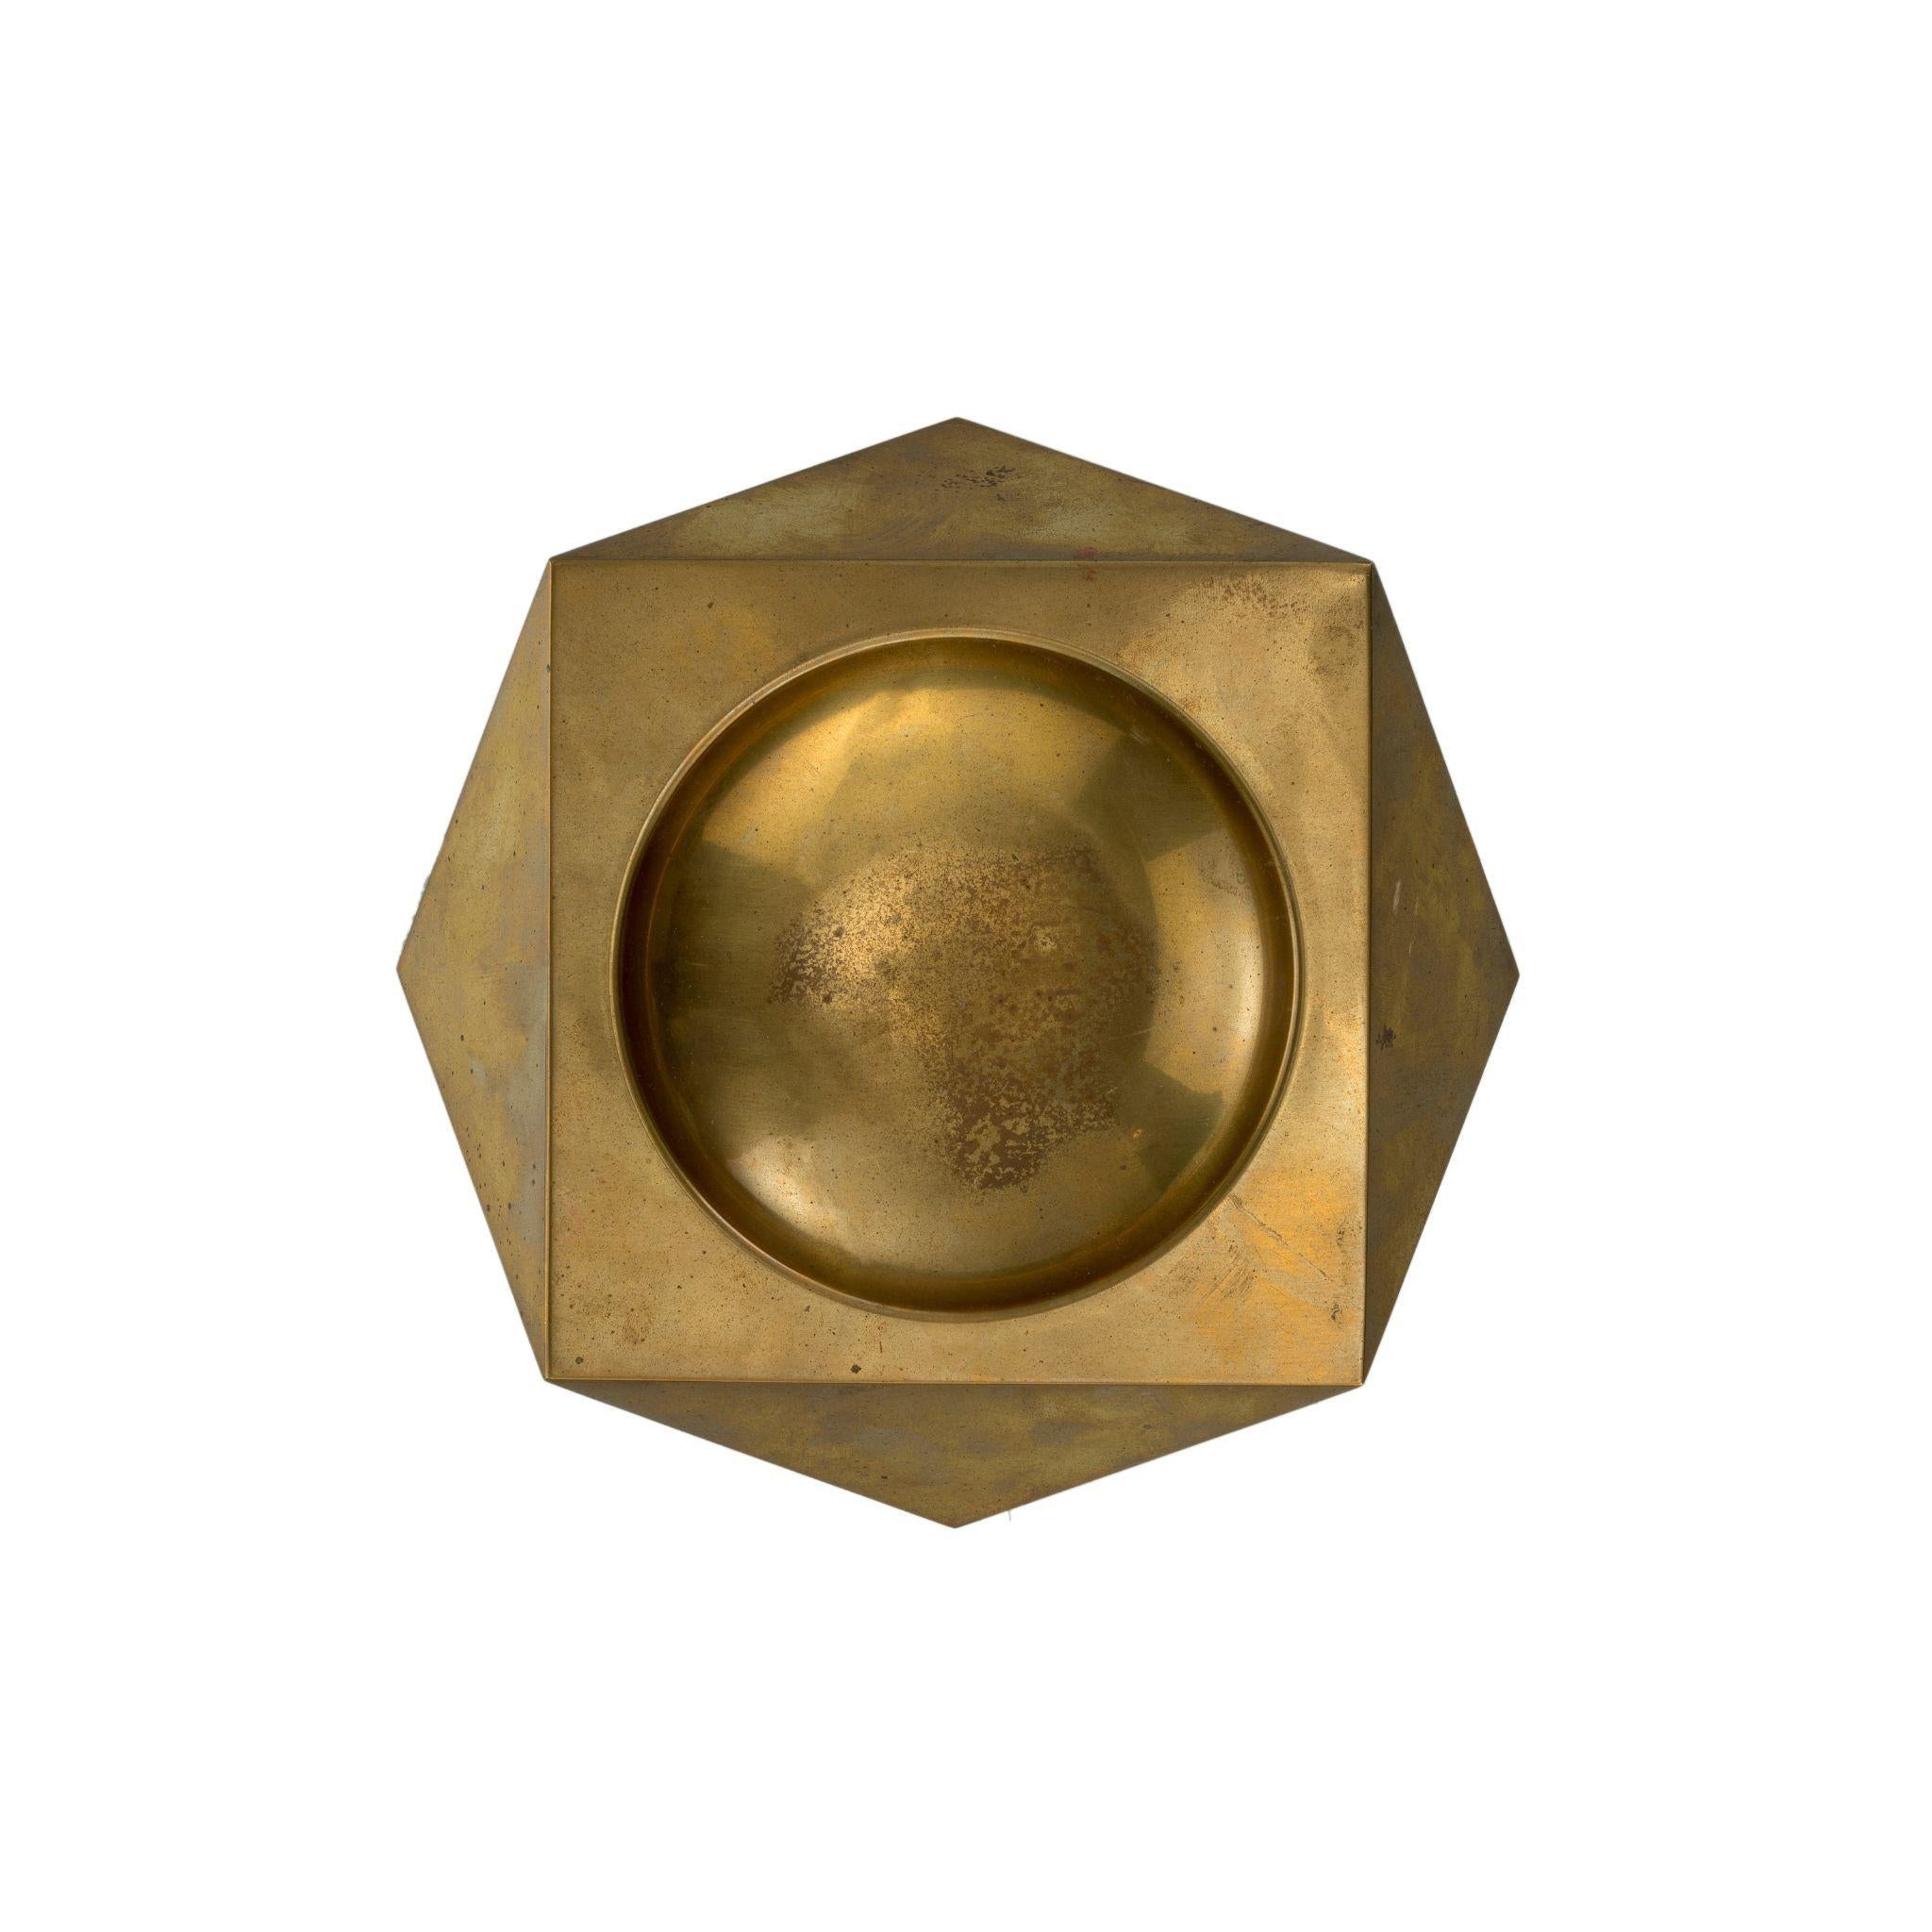 Perfect for both smokers and non-smokers alike, this brass ashtray is not only functional but also visually appealing. Its geometric shape adds a touch of modern elegance to any room, and its durable brass construction ensures it will stand the test